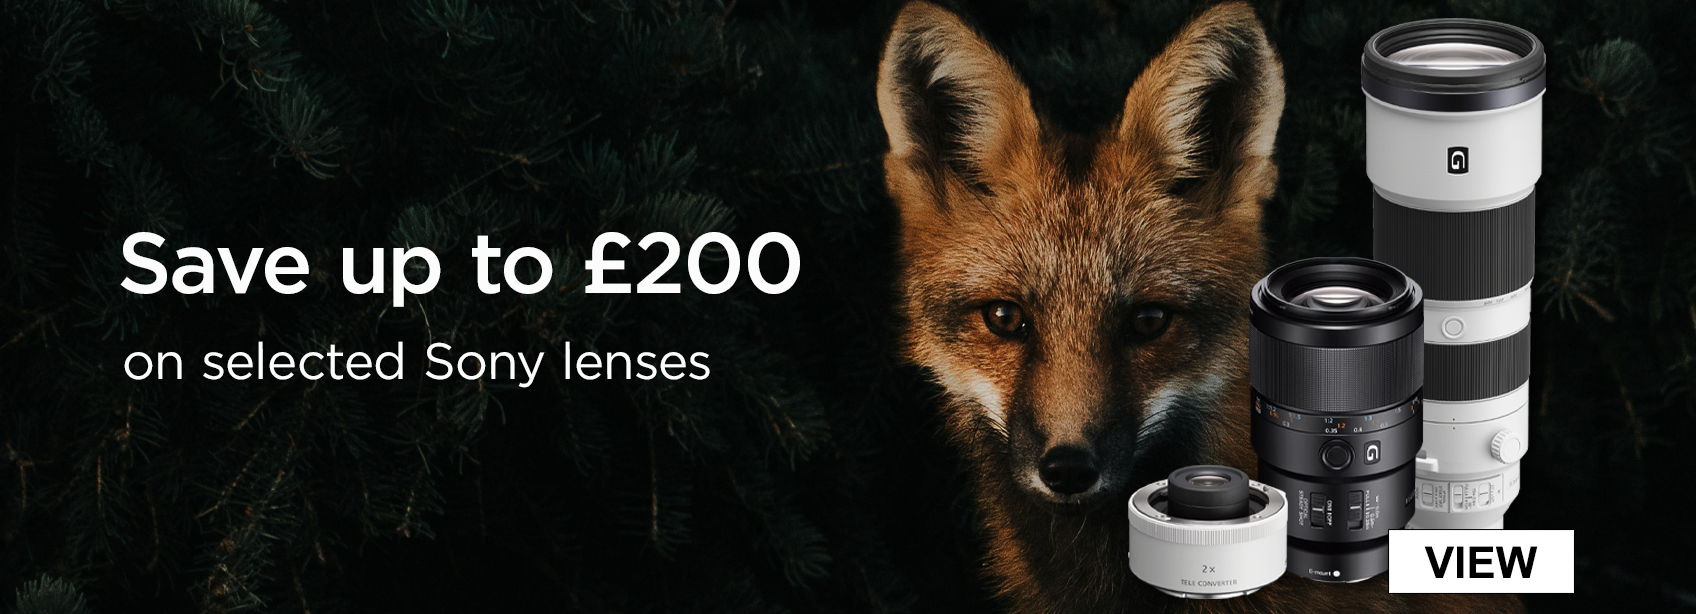 Save up to £200 on selected Sony lenses